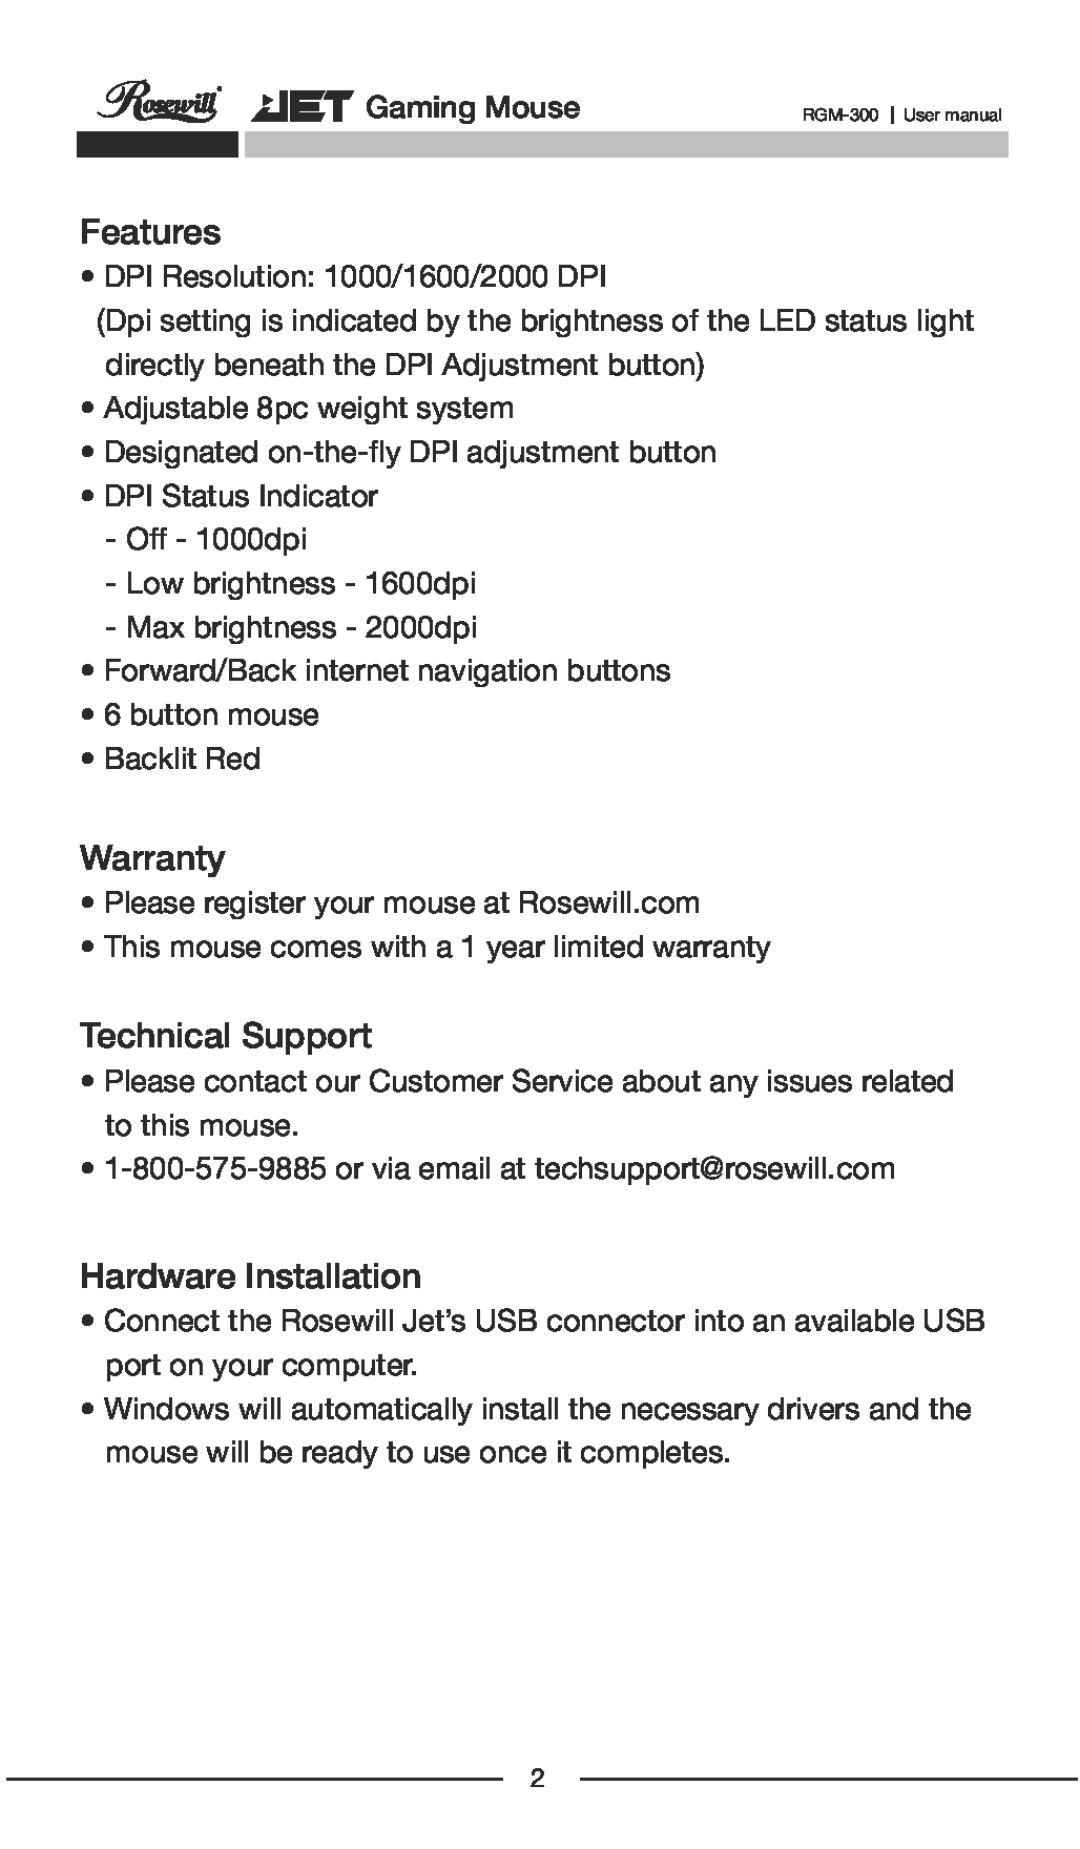 Rosewill RGM-300 user manual Features, Warranty, Technical Support, Hardware Installation 